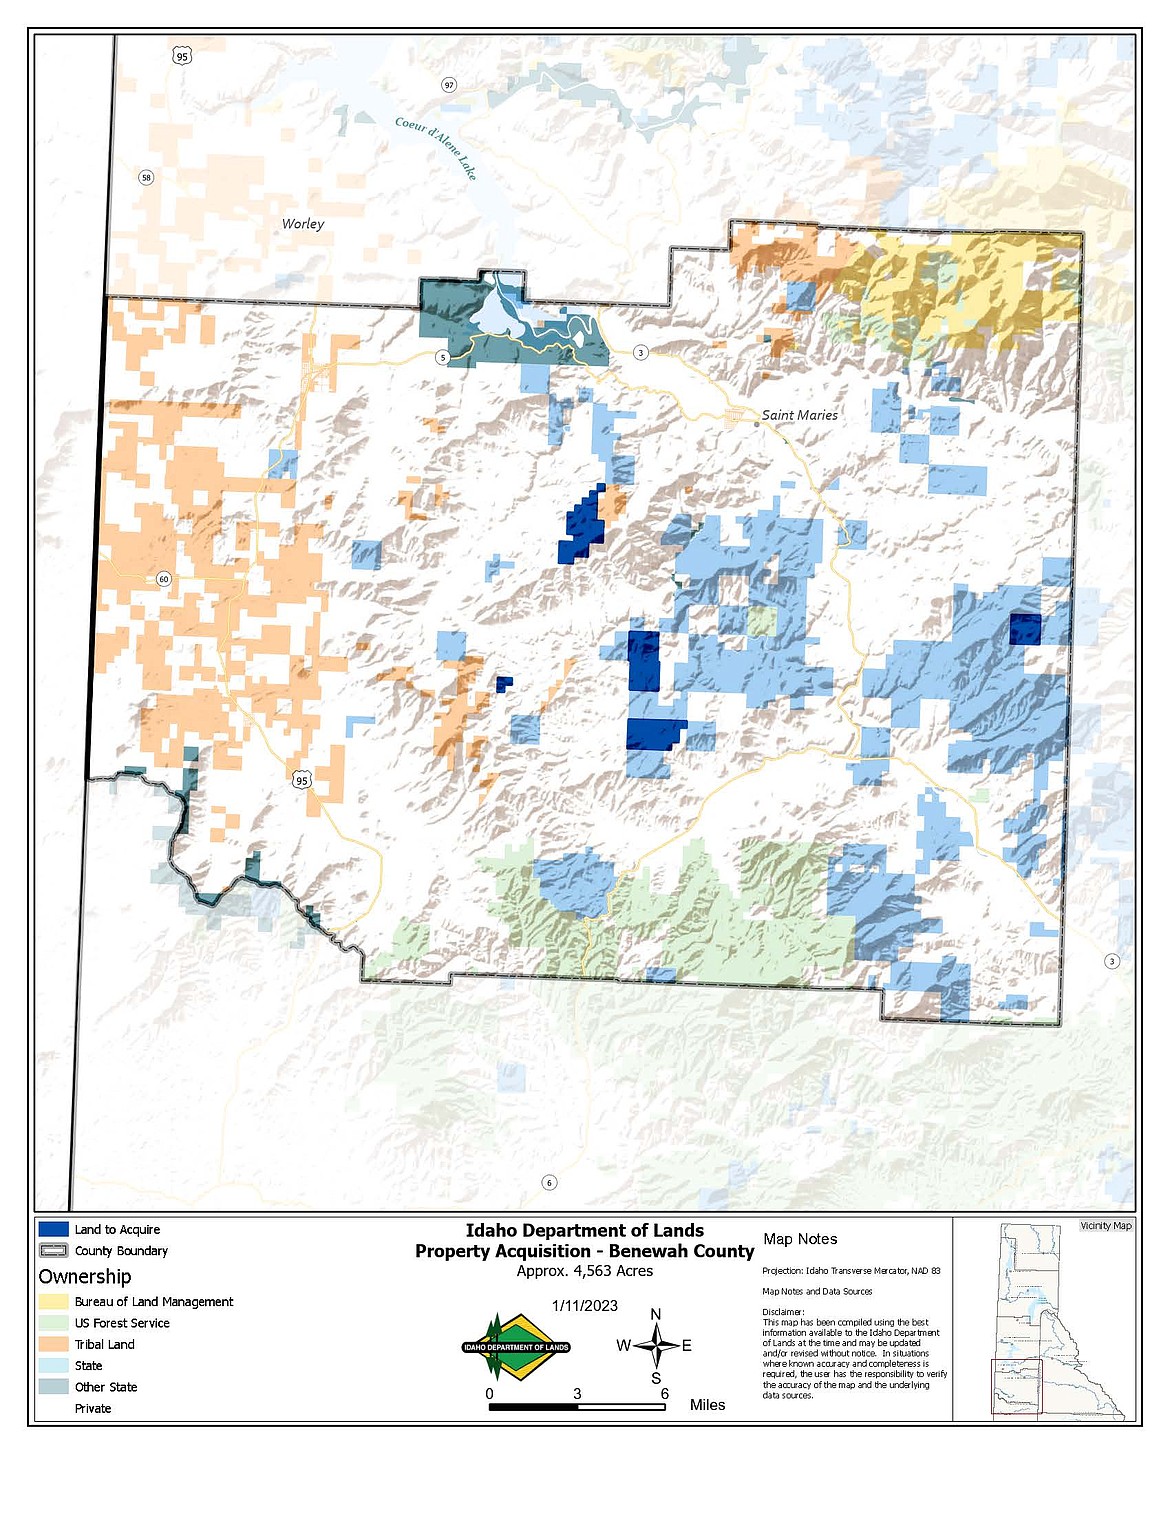 Idaho Department of Lands announced it purchased almost 18,050 acres of timberland spread across five north Idaho counties. Above, a map shows the location of the parcels purchased in Benewah County.